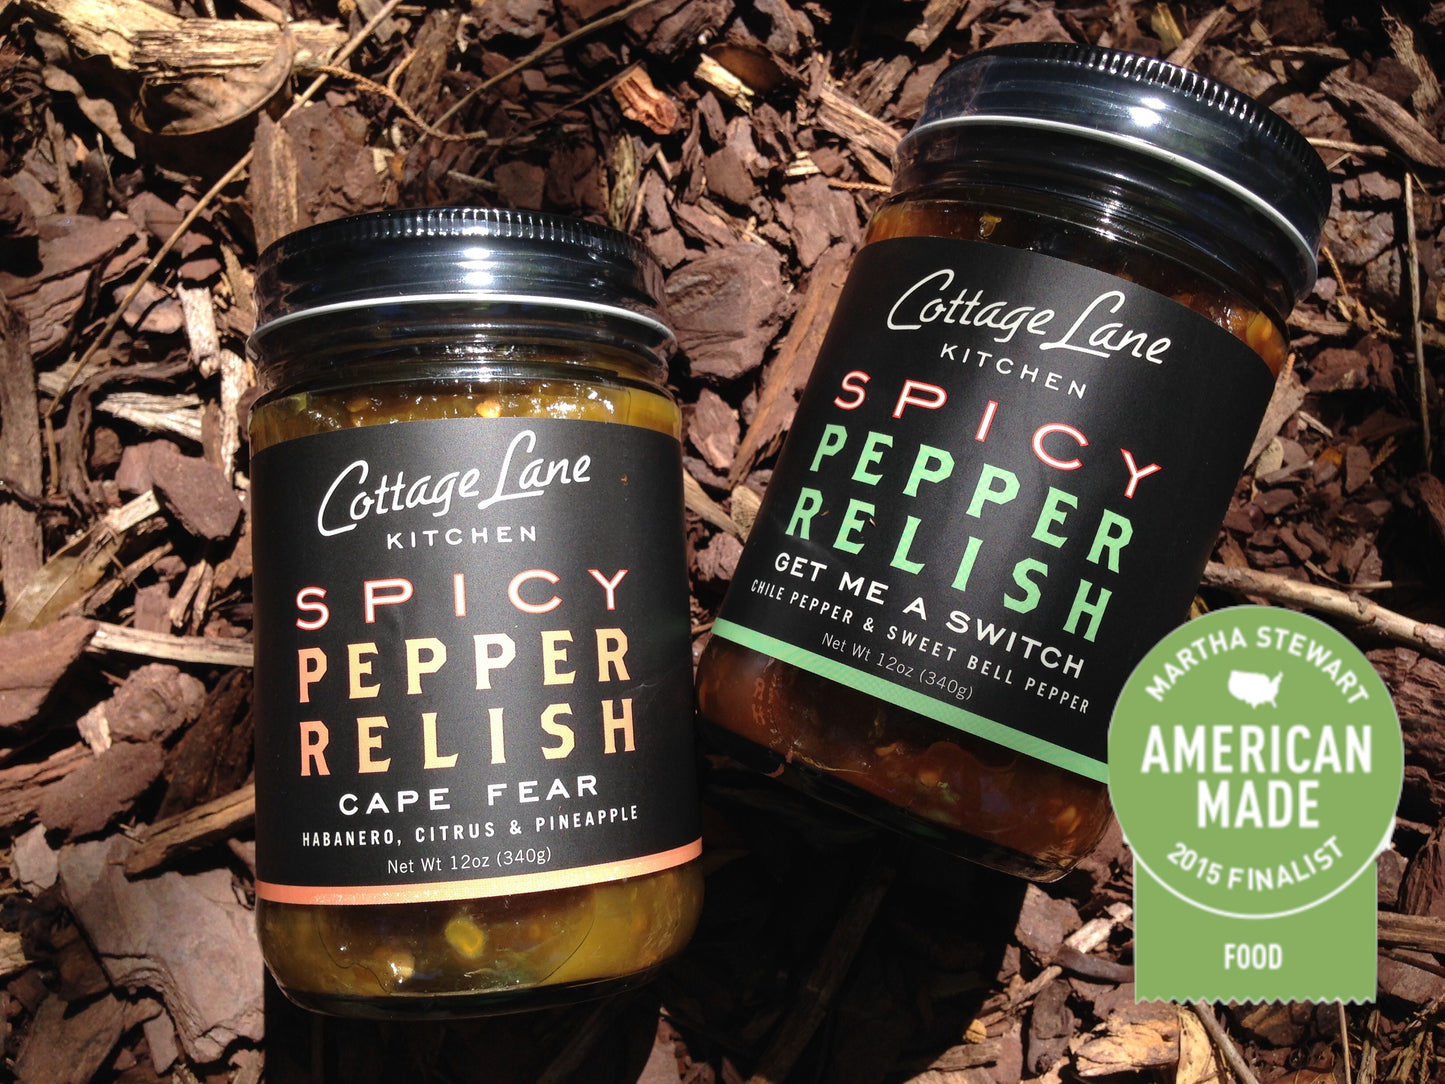 Photo of Cape Fear and Get Me A Switch Spicy Pepper Relishes with logo of 2015 Martha Stewart American Made Finalist in Food